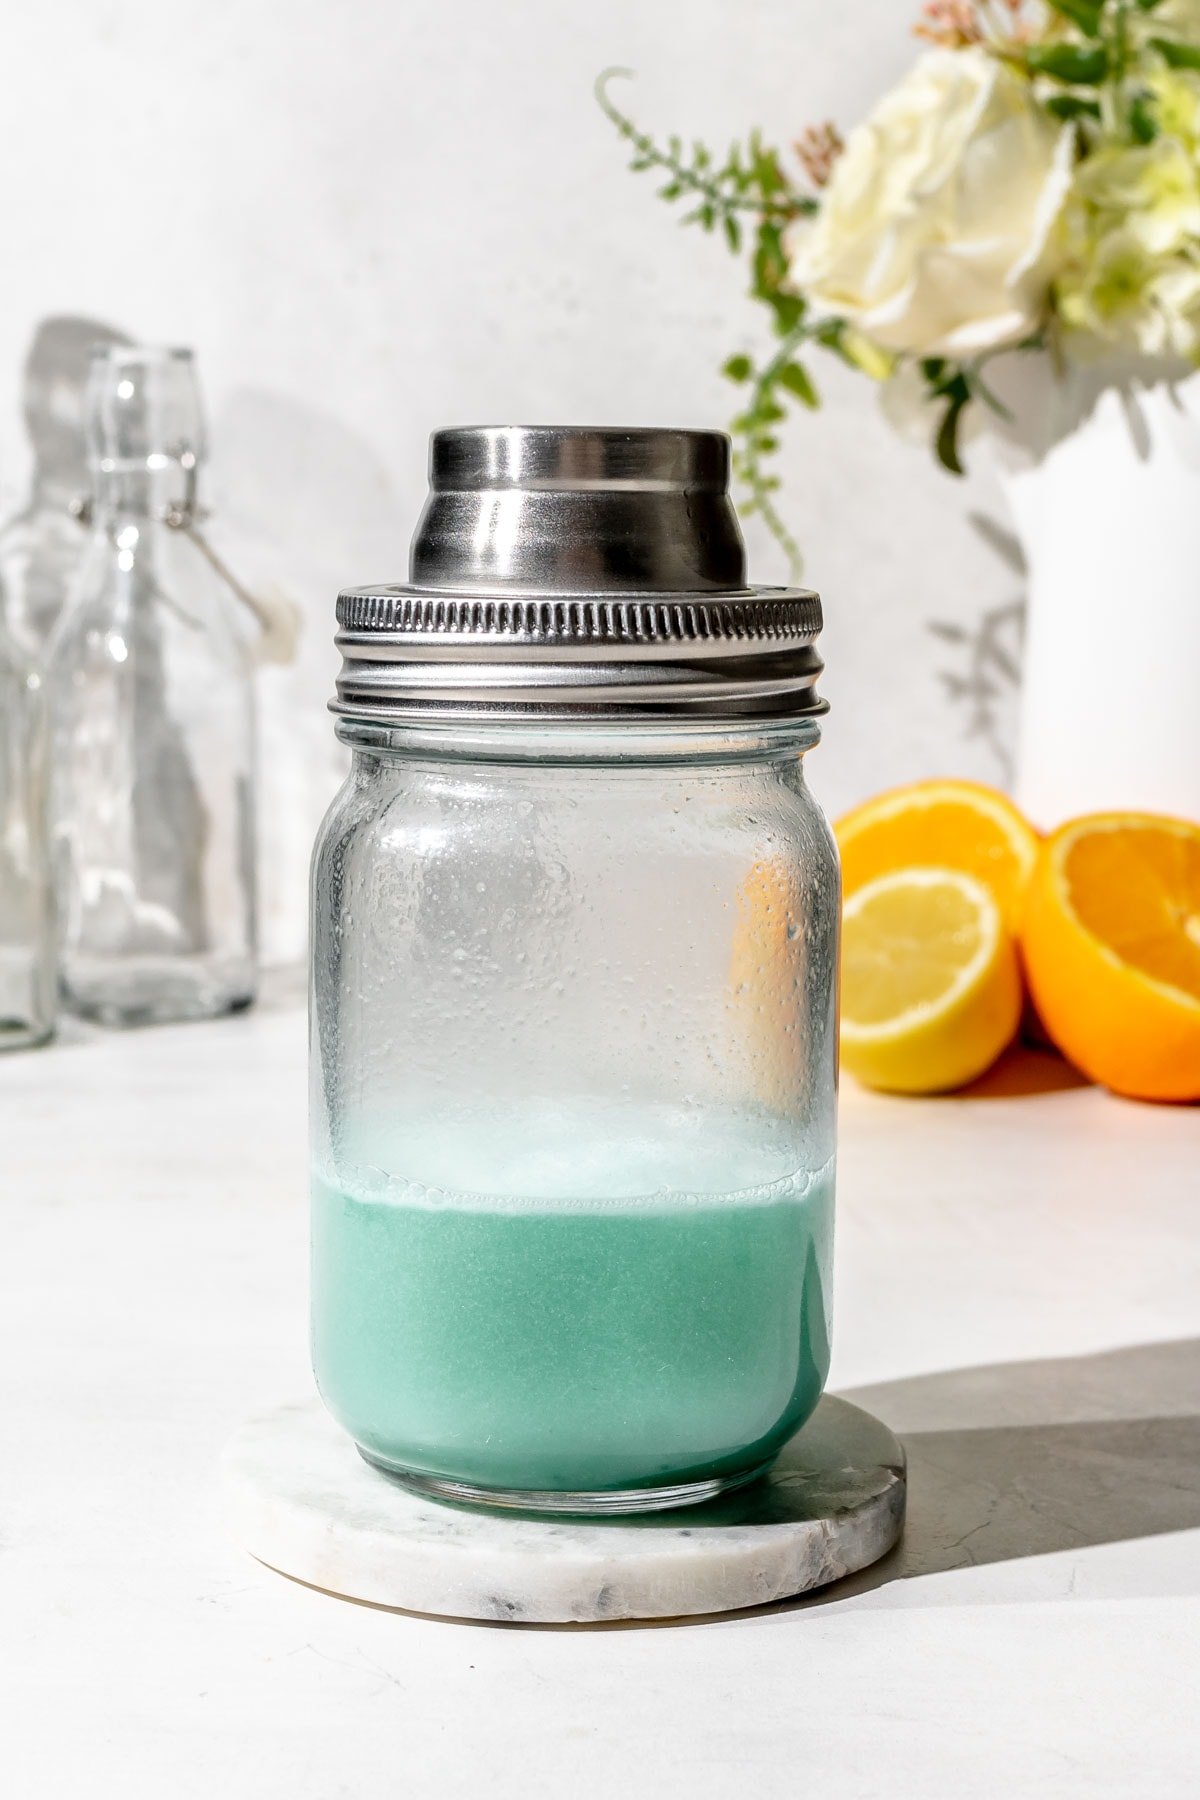 a cocktail shaker filled with blue liquid